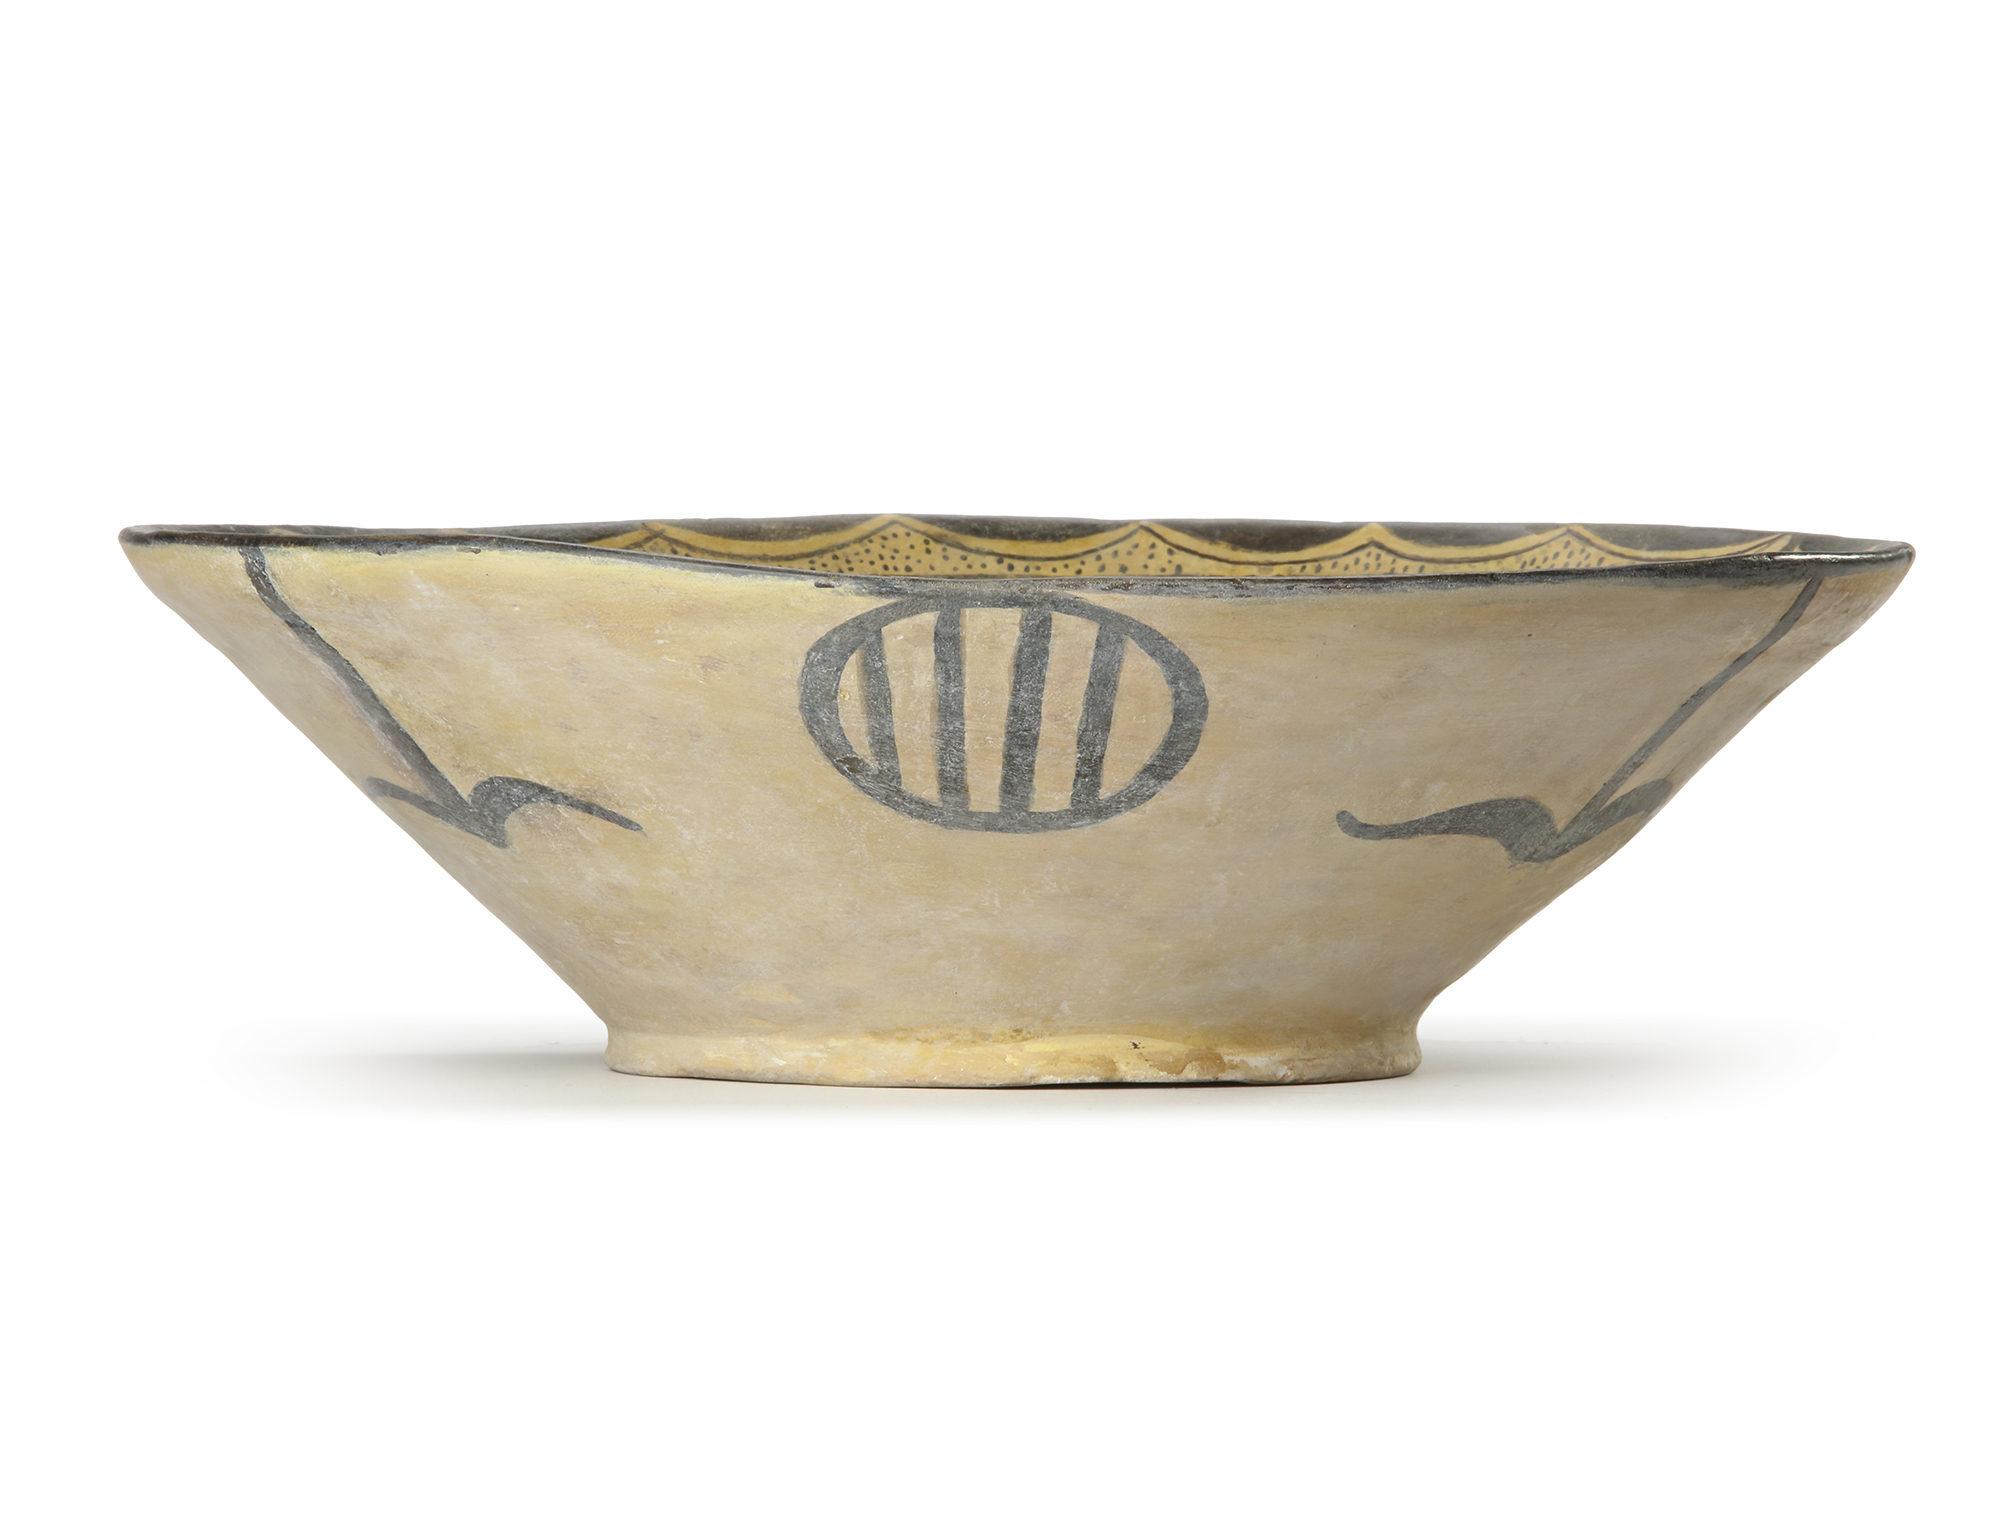 A NISHAPUR POTTERY BOWL, EASTERN PERSIA, 10TH CENTURY - Image 3 of 10